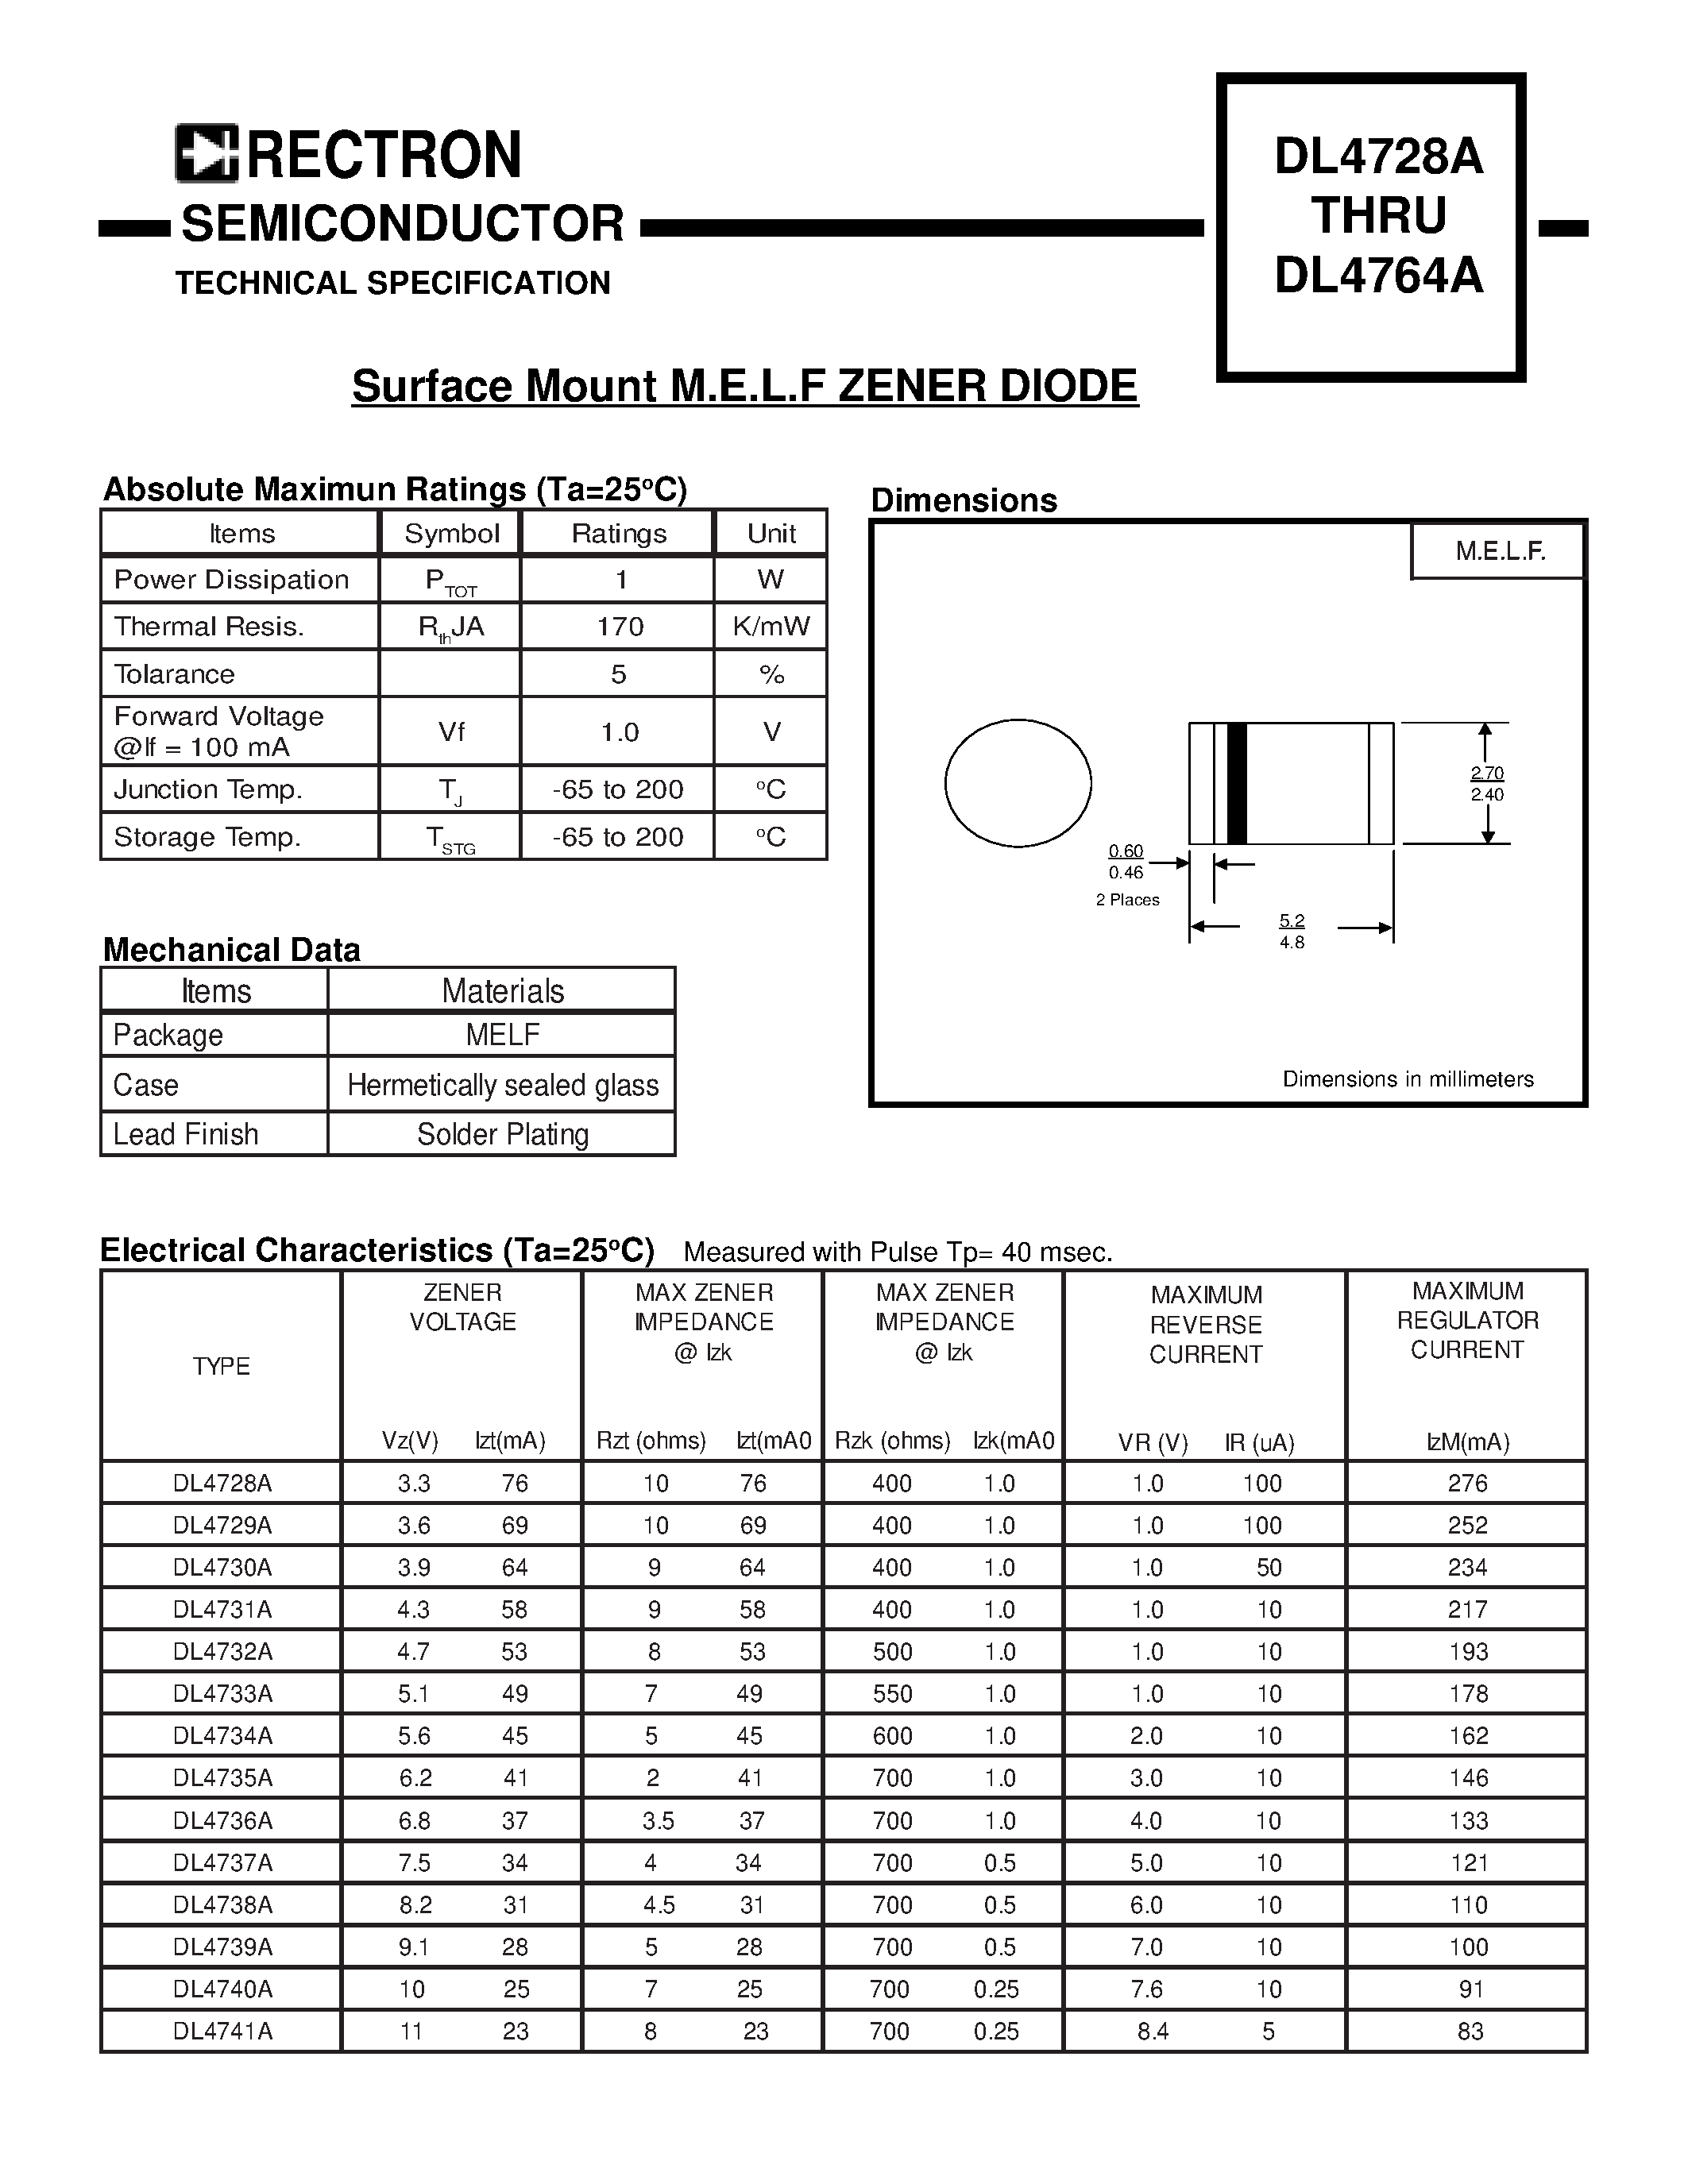 Datasheet DL4745A - Surface Mount M.E.L.F ZENER DIODE page 1